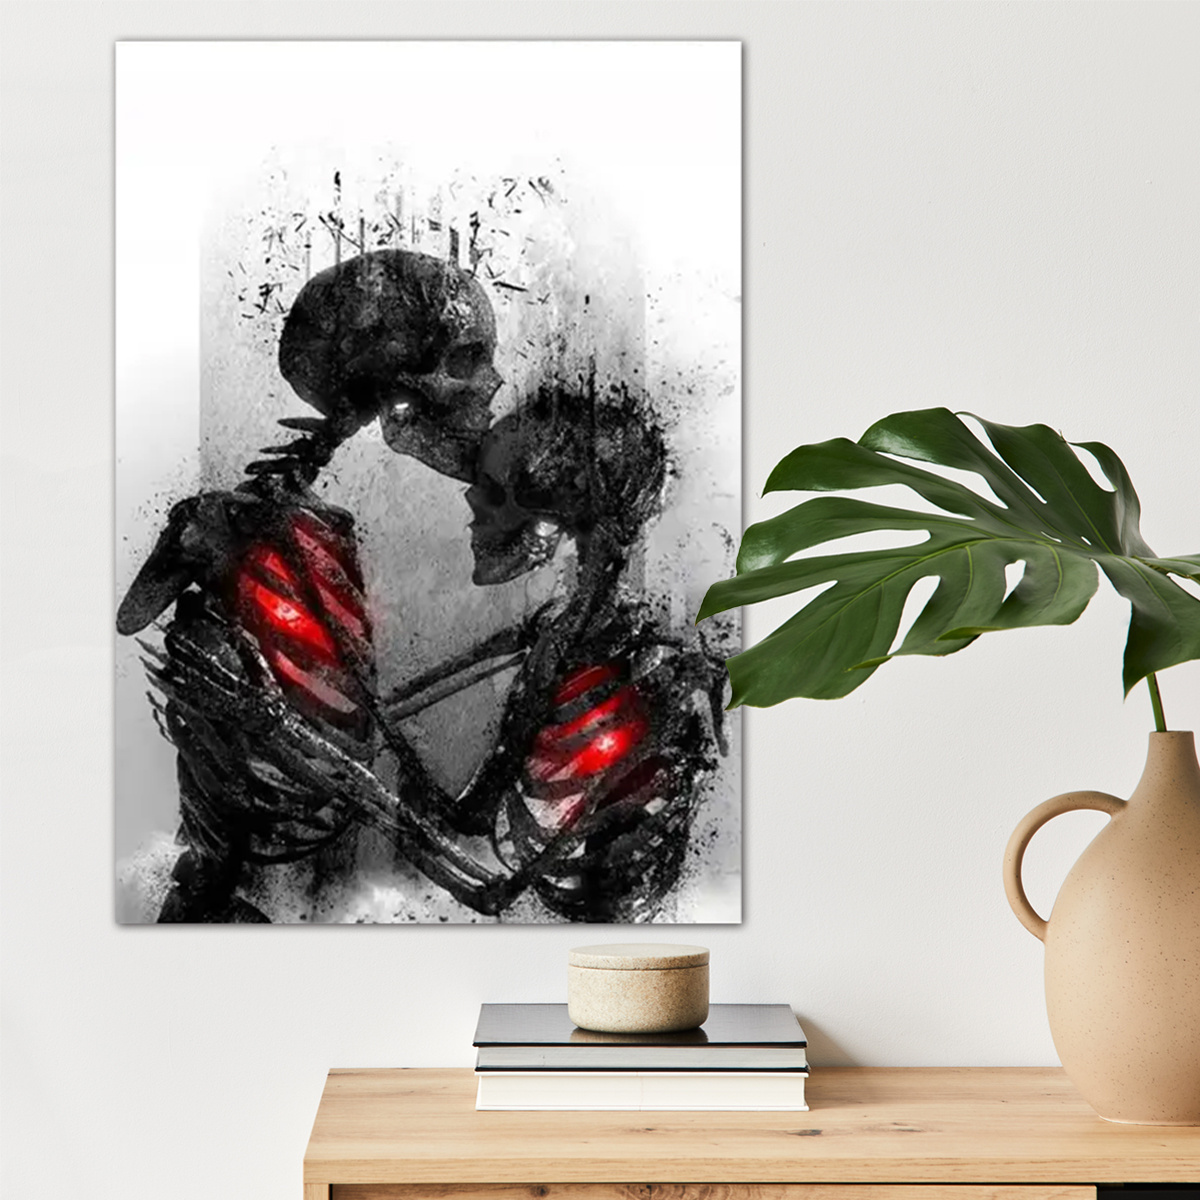 

1pc Hugging Couple Canvas Wall Art For Halloween And Home Decor, Love Poster Canvas Prints Wall Decor For Living Room Bedroom Kitchen Office Cafe Decor, Perfect Gift And Decoration